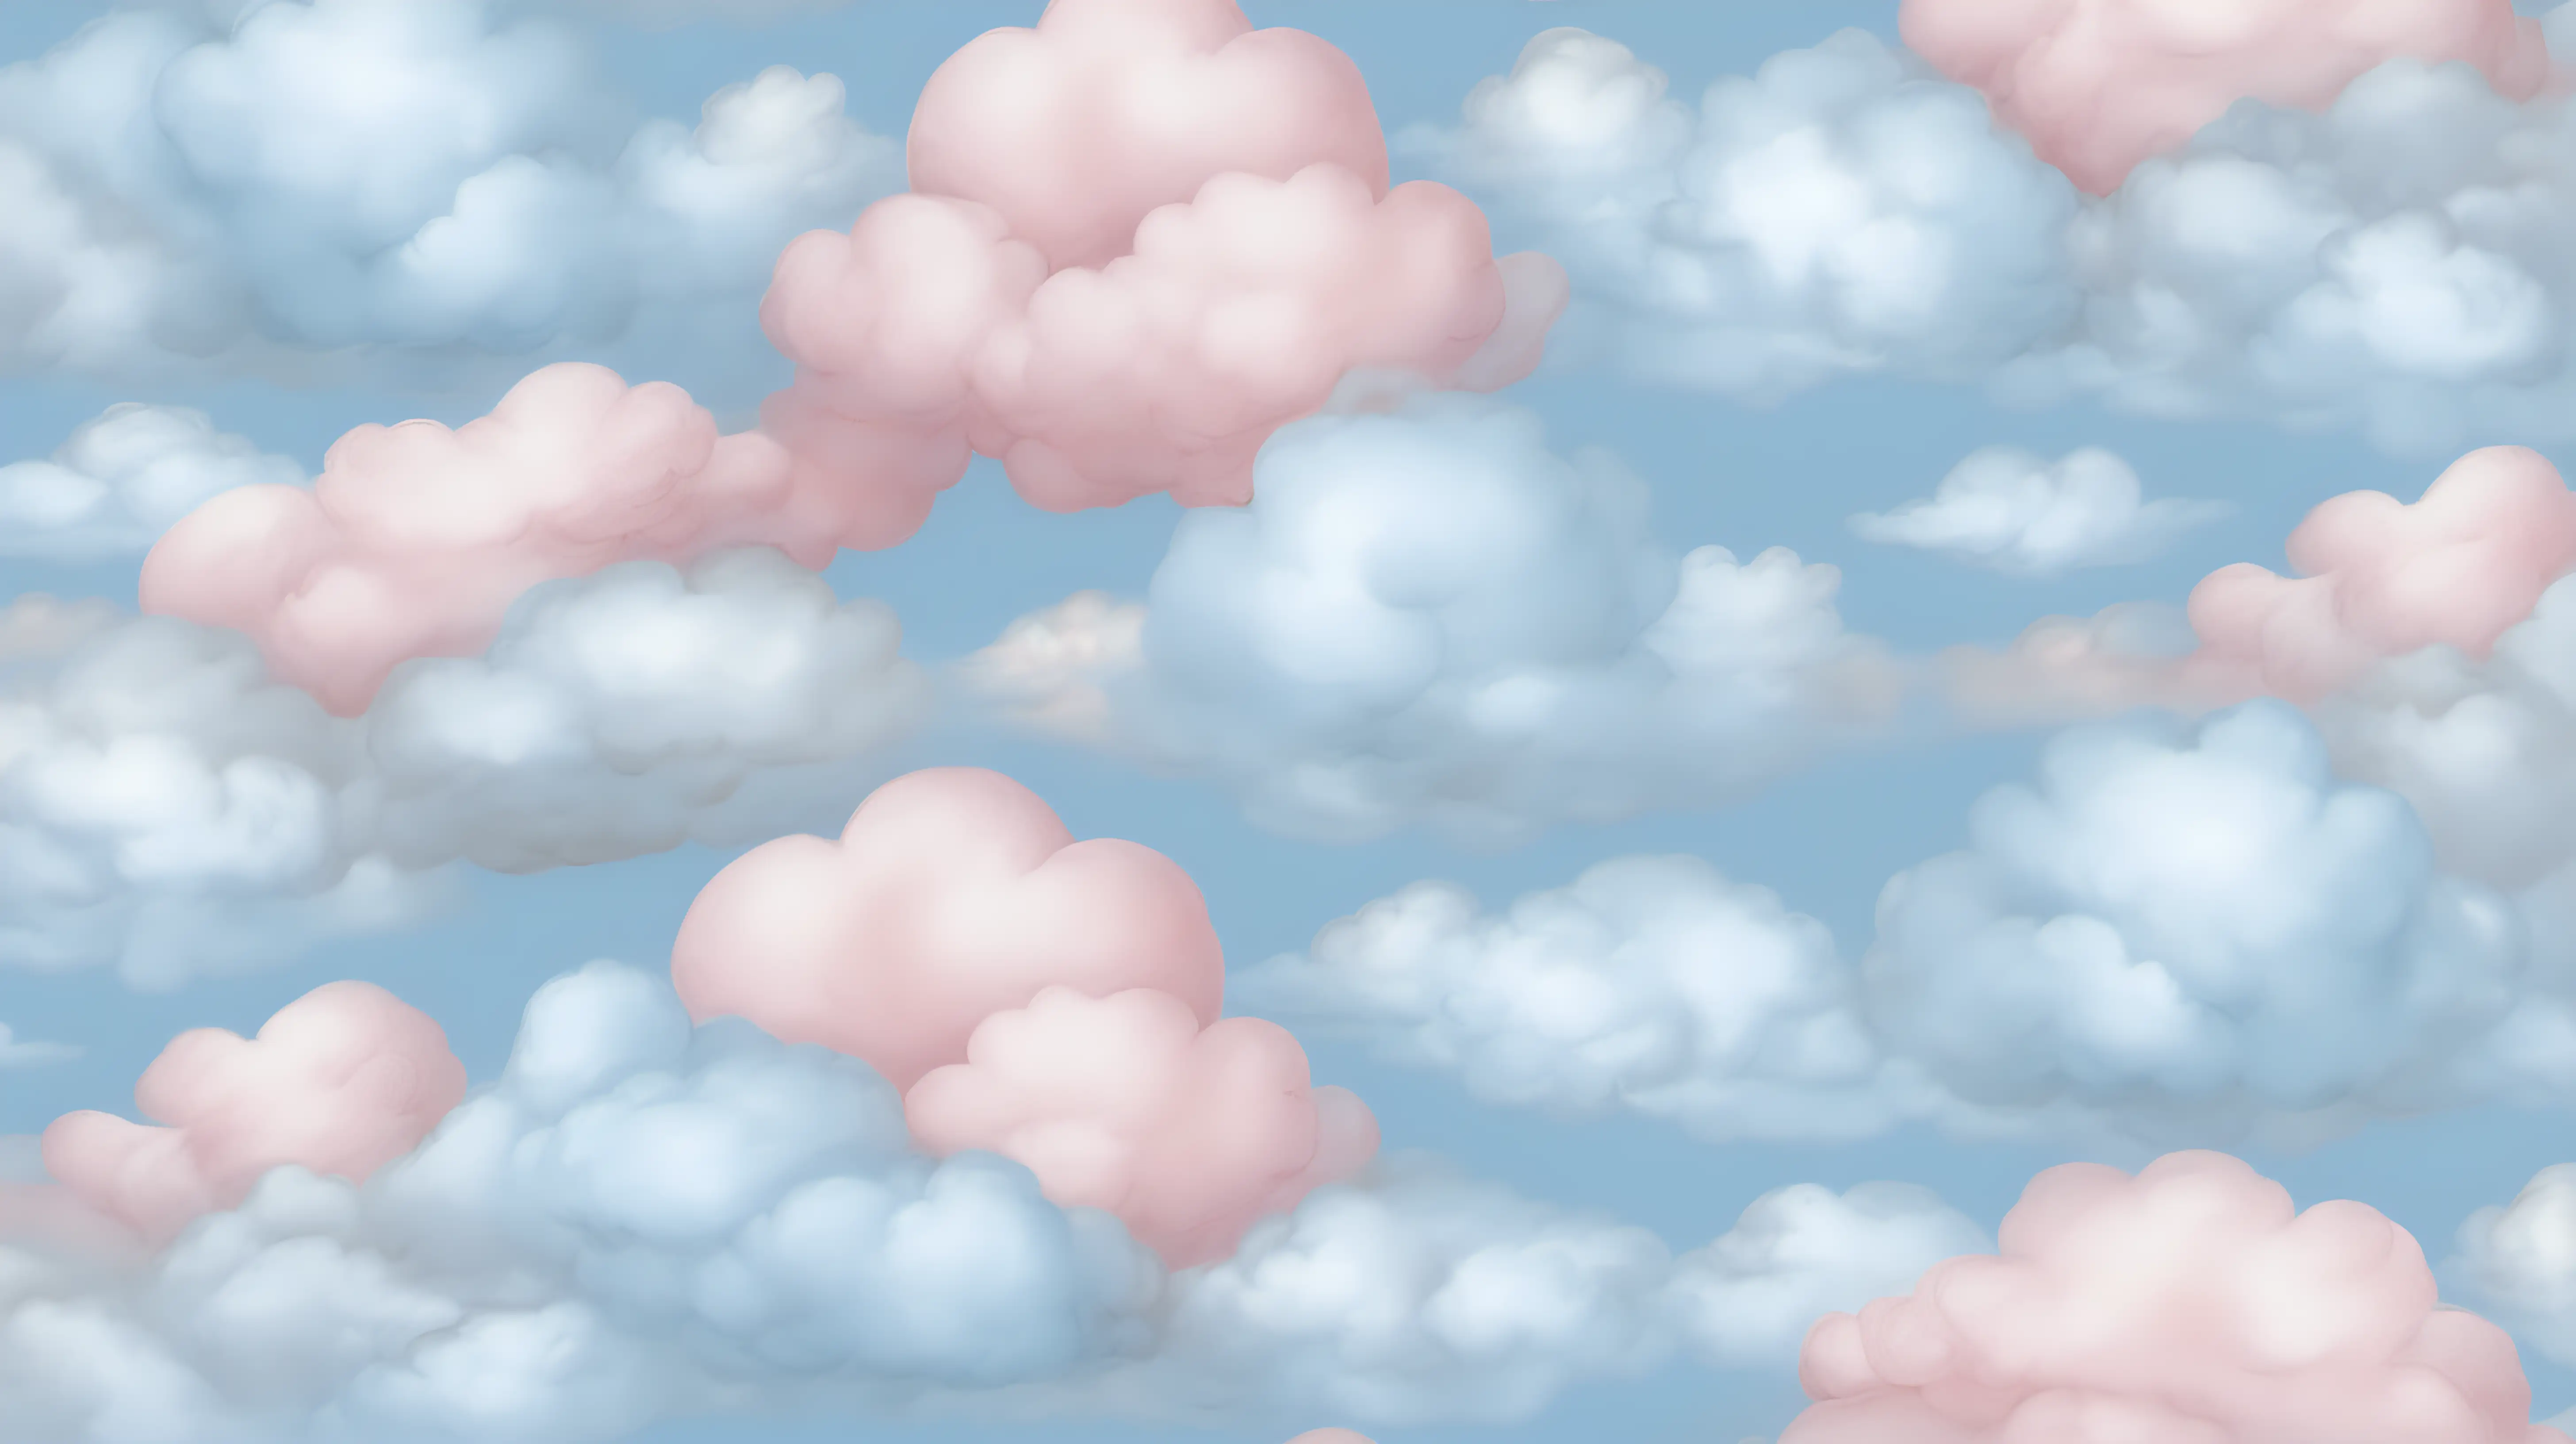 A dreamy cloud pattern in shades of pastel blue and pink, evoking a sense of calm and tranquility.